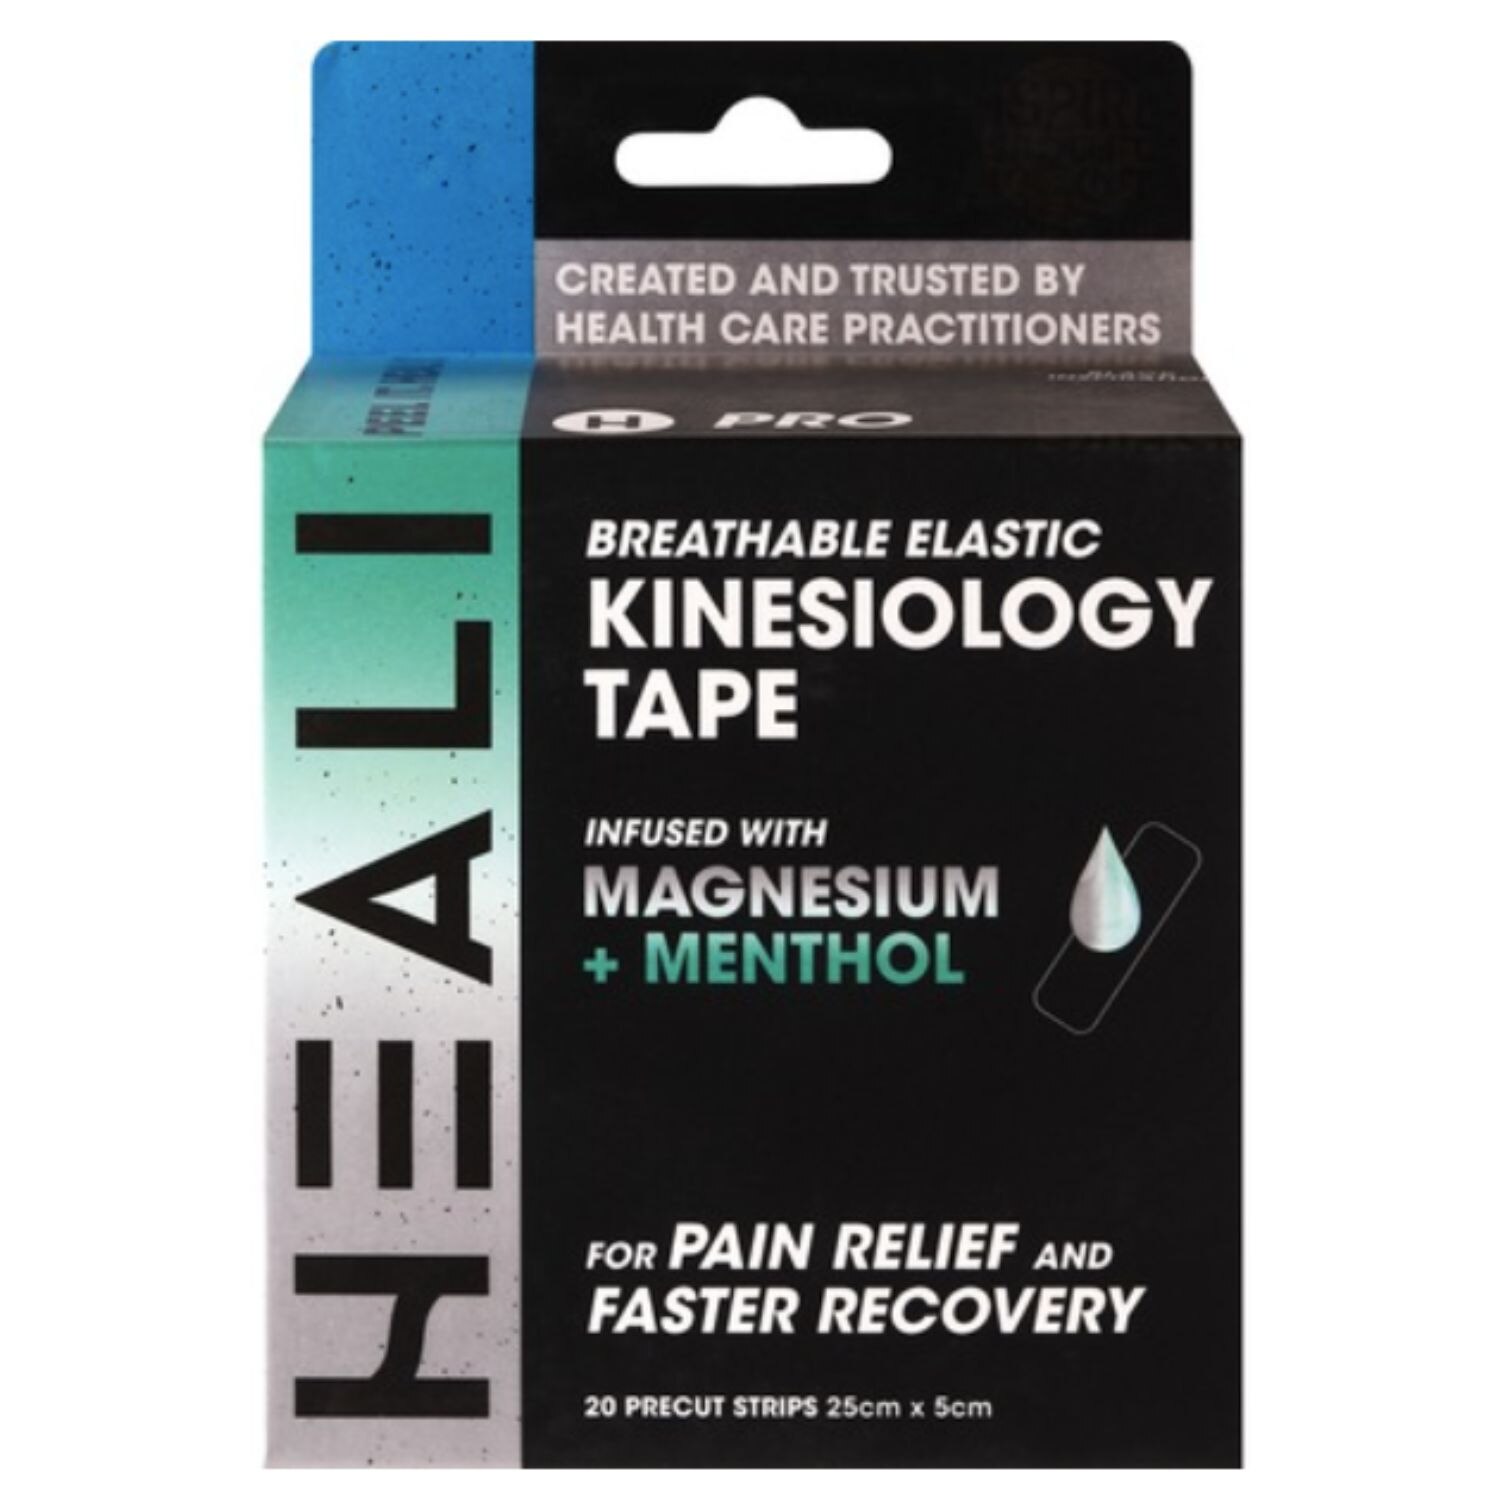 Heali Pro Kinesiology Tape Infused With Magnesium & Menthol, 20 Precut Strips, Black Inspiration , CVS